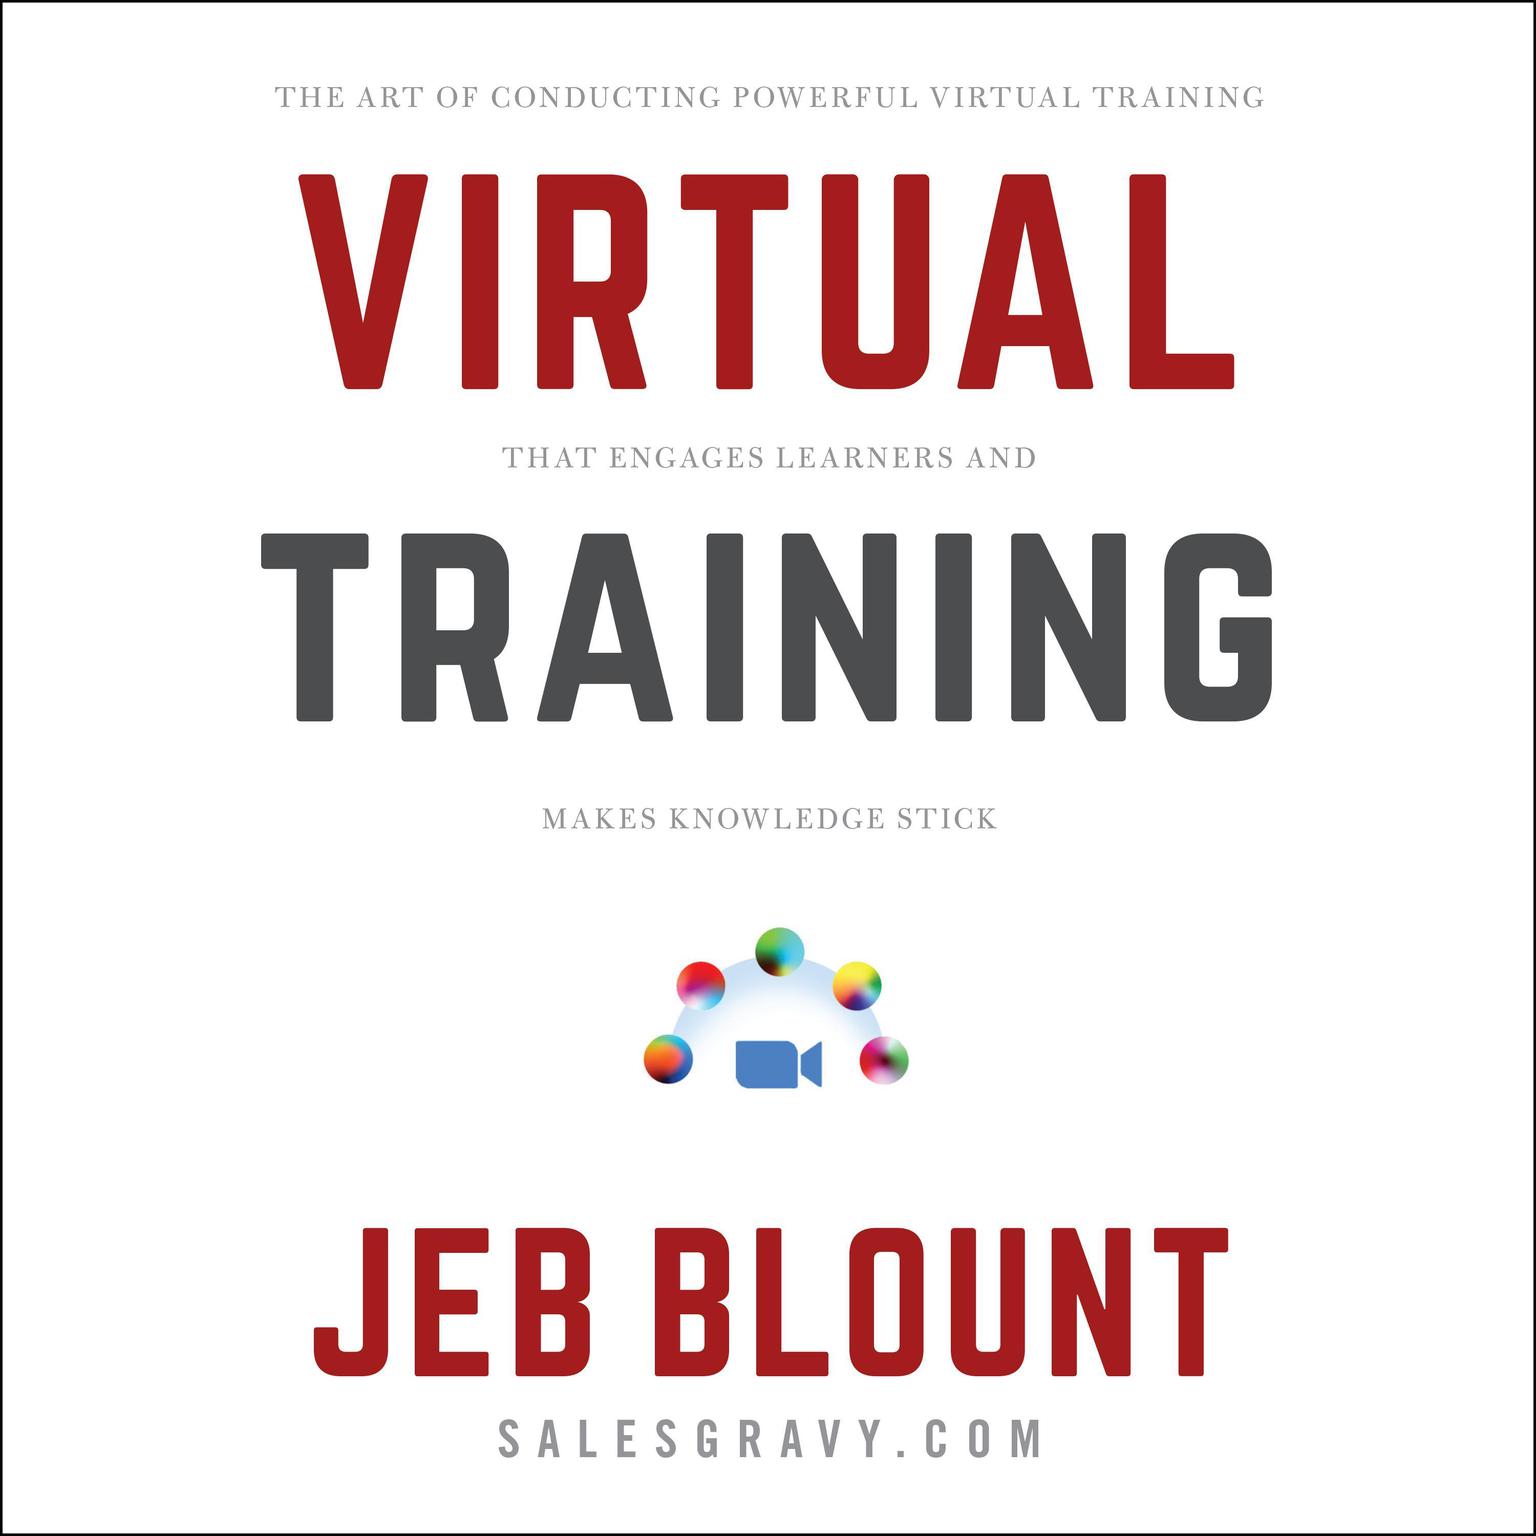 Virtual Training: The Art of Conducting Powerful Virtual Training that Engages Learners and Makes Knowledge Stick Audiobook, by Jeb Blount